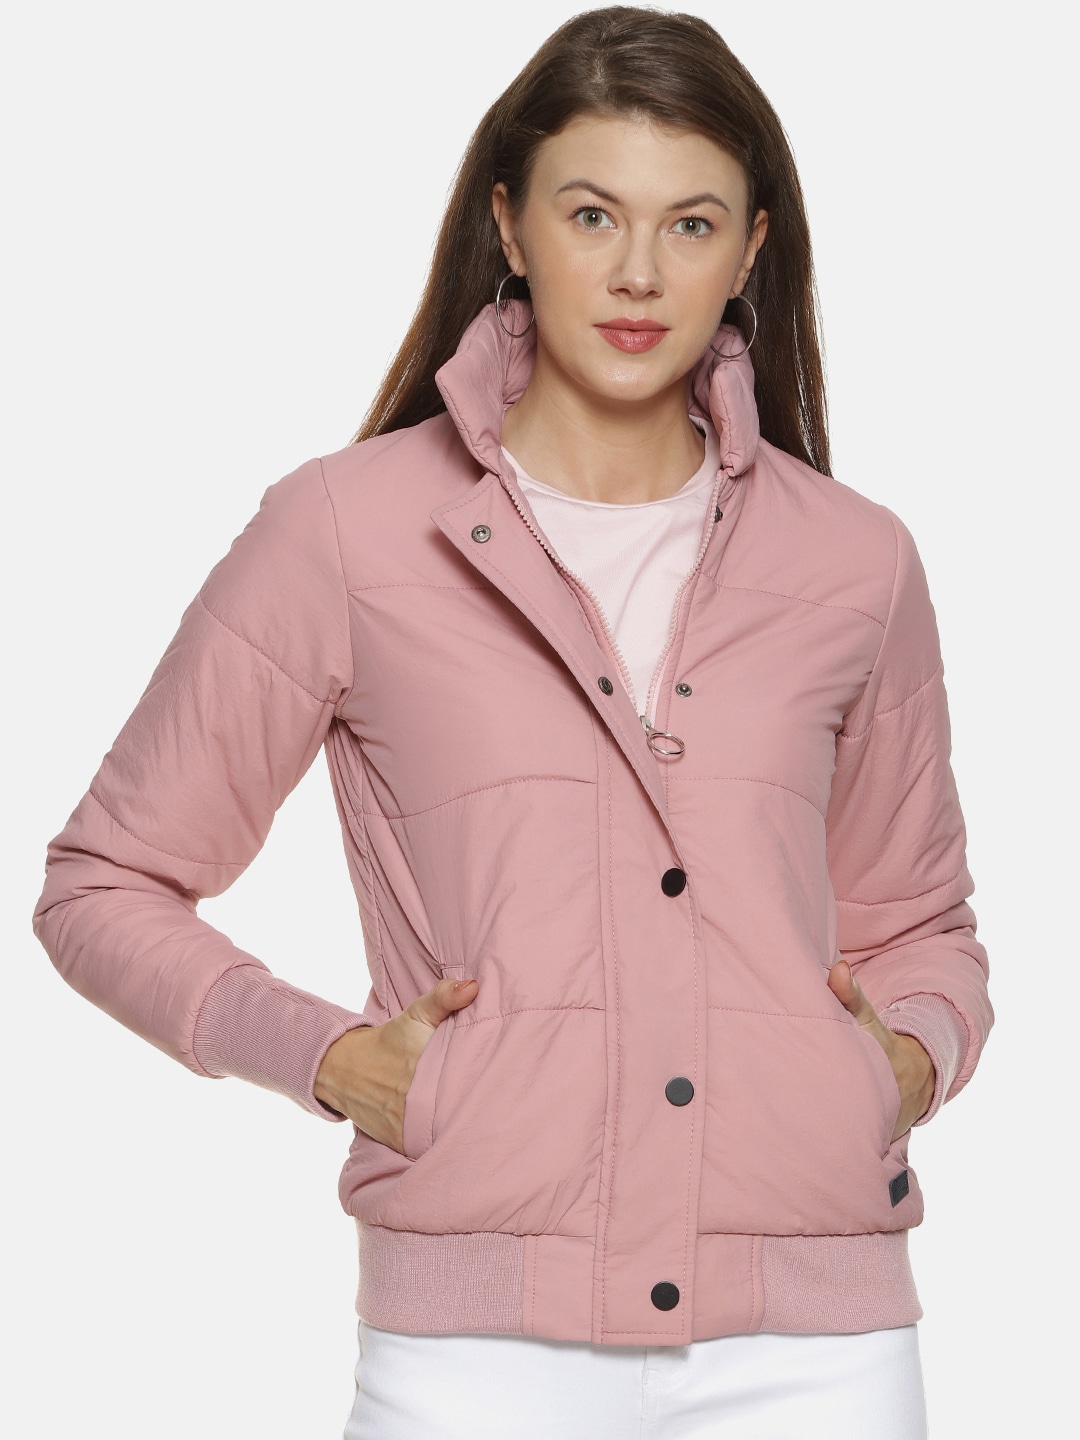 Campus Sutra Women Peach-Coloured Solid Windcheater Quilted Jacket Price in India